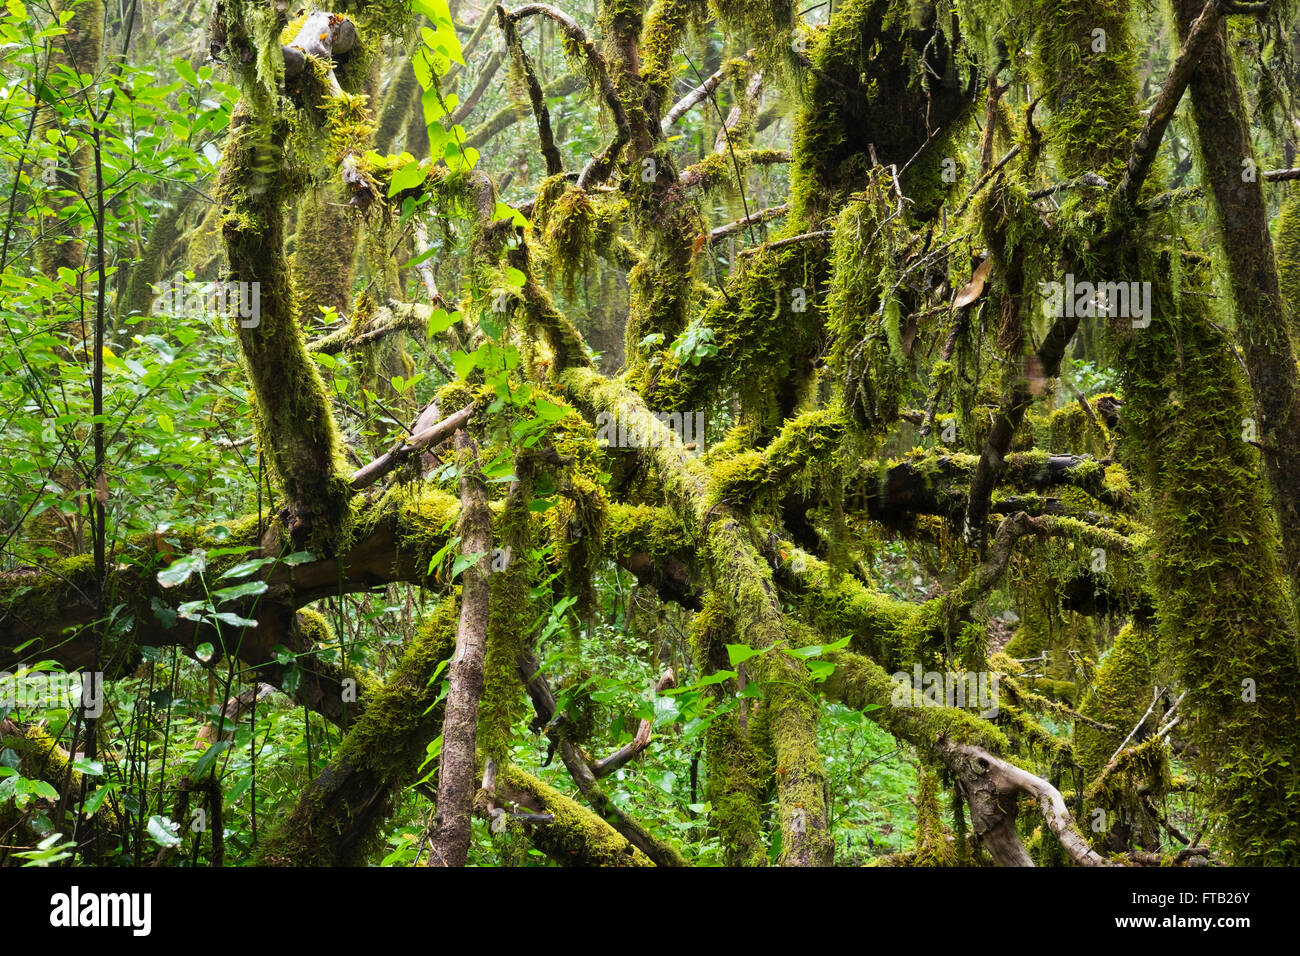 Mossy tree branches in a laurel forest, Garajonay National Park, La Gomera, Canary Islands, Spain Stock Photo